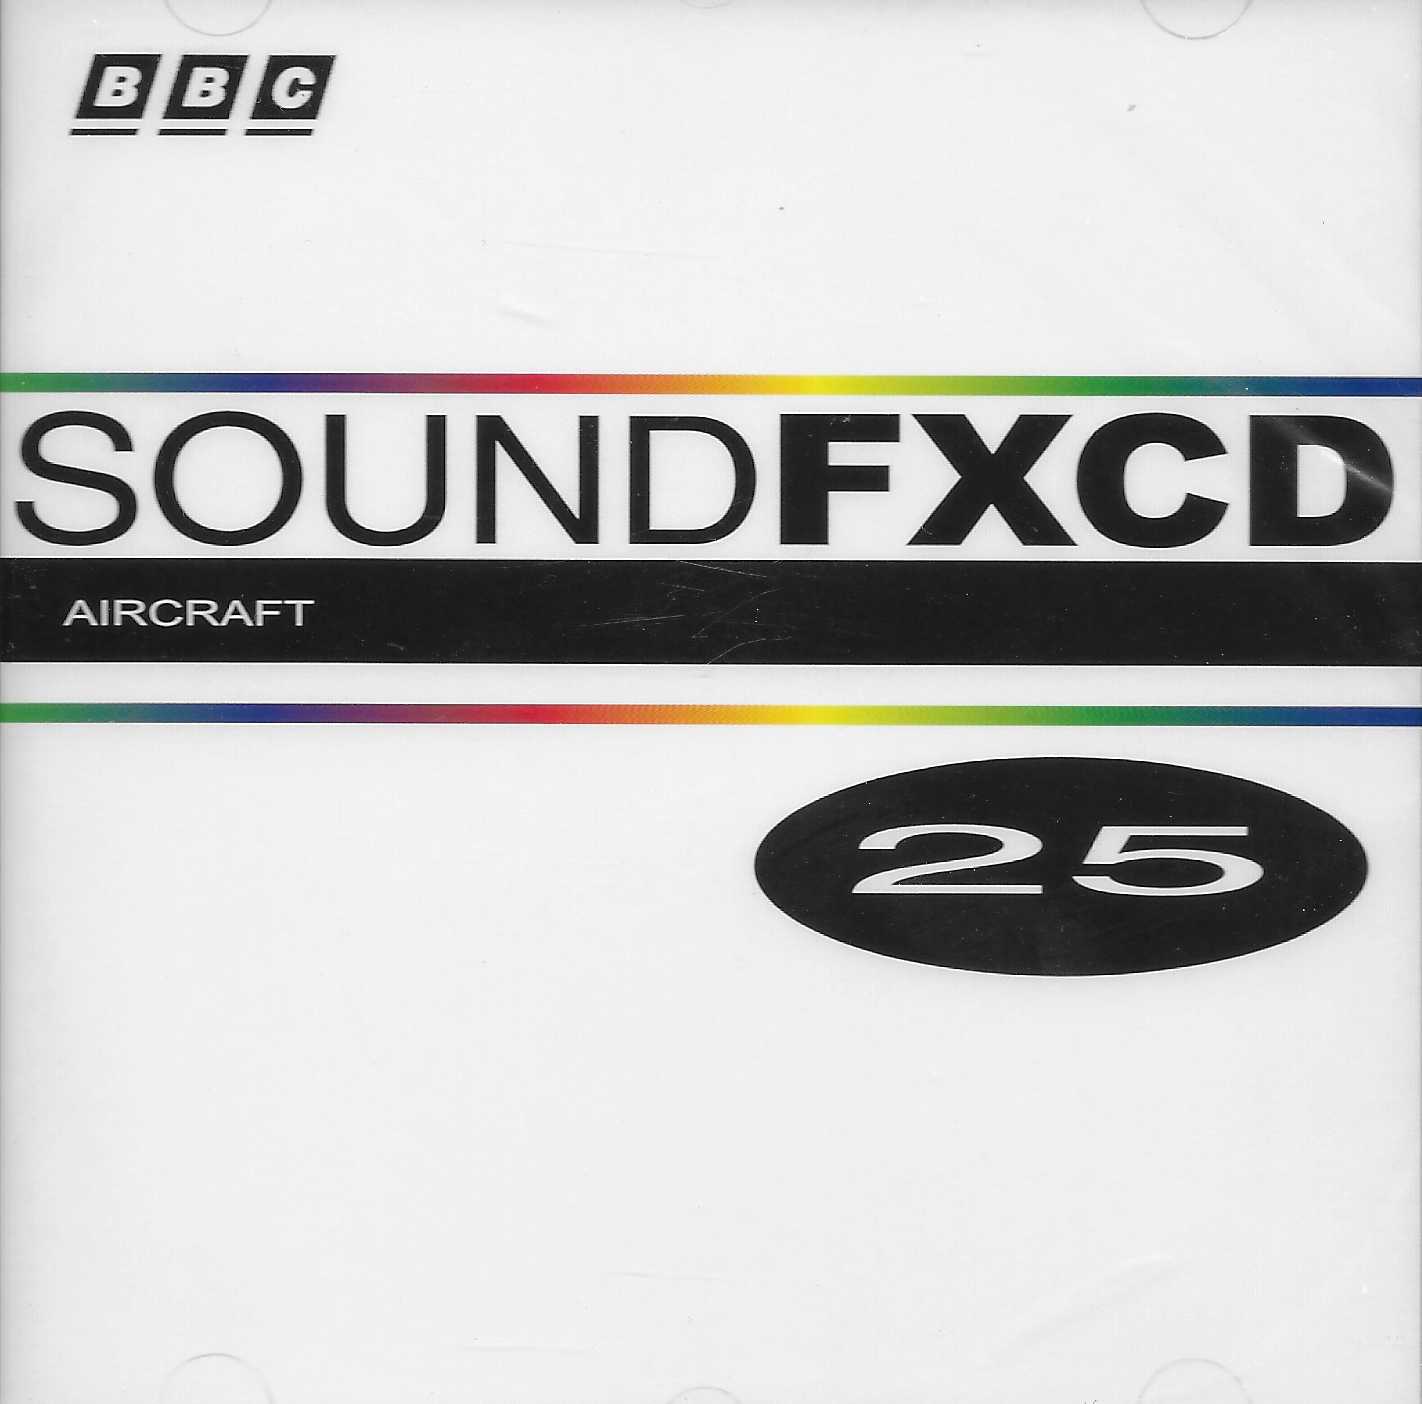 Picture of BBCCD SFX025 Aircraft by artist Various from the BBC records and Tapes library